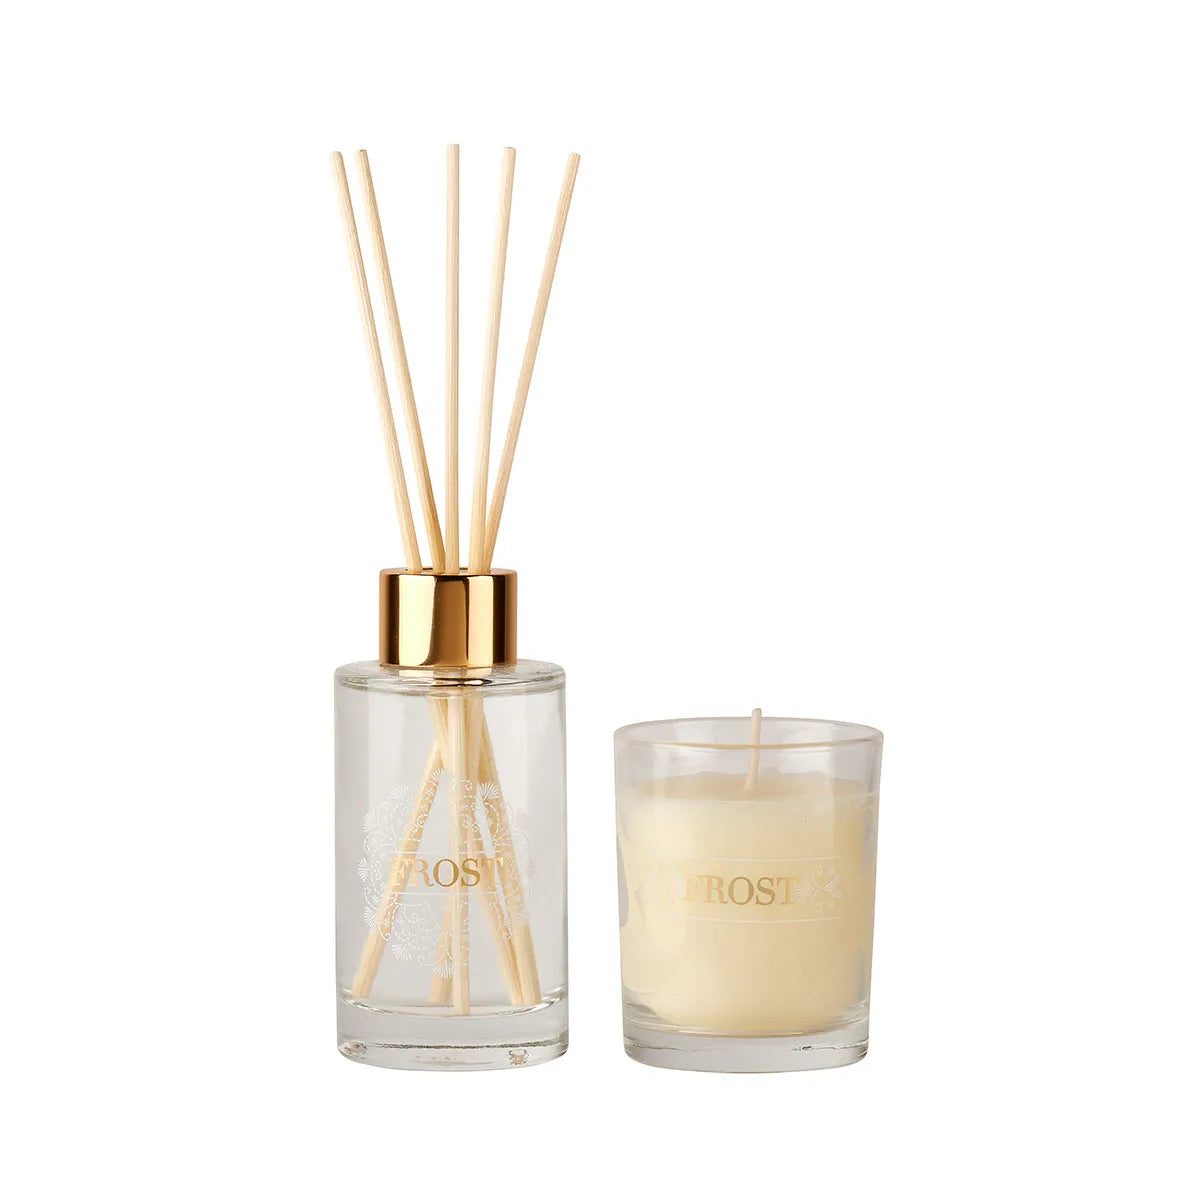 Frost Candle and Diffuser Gift Set